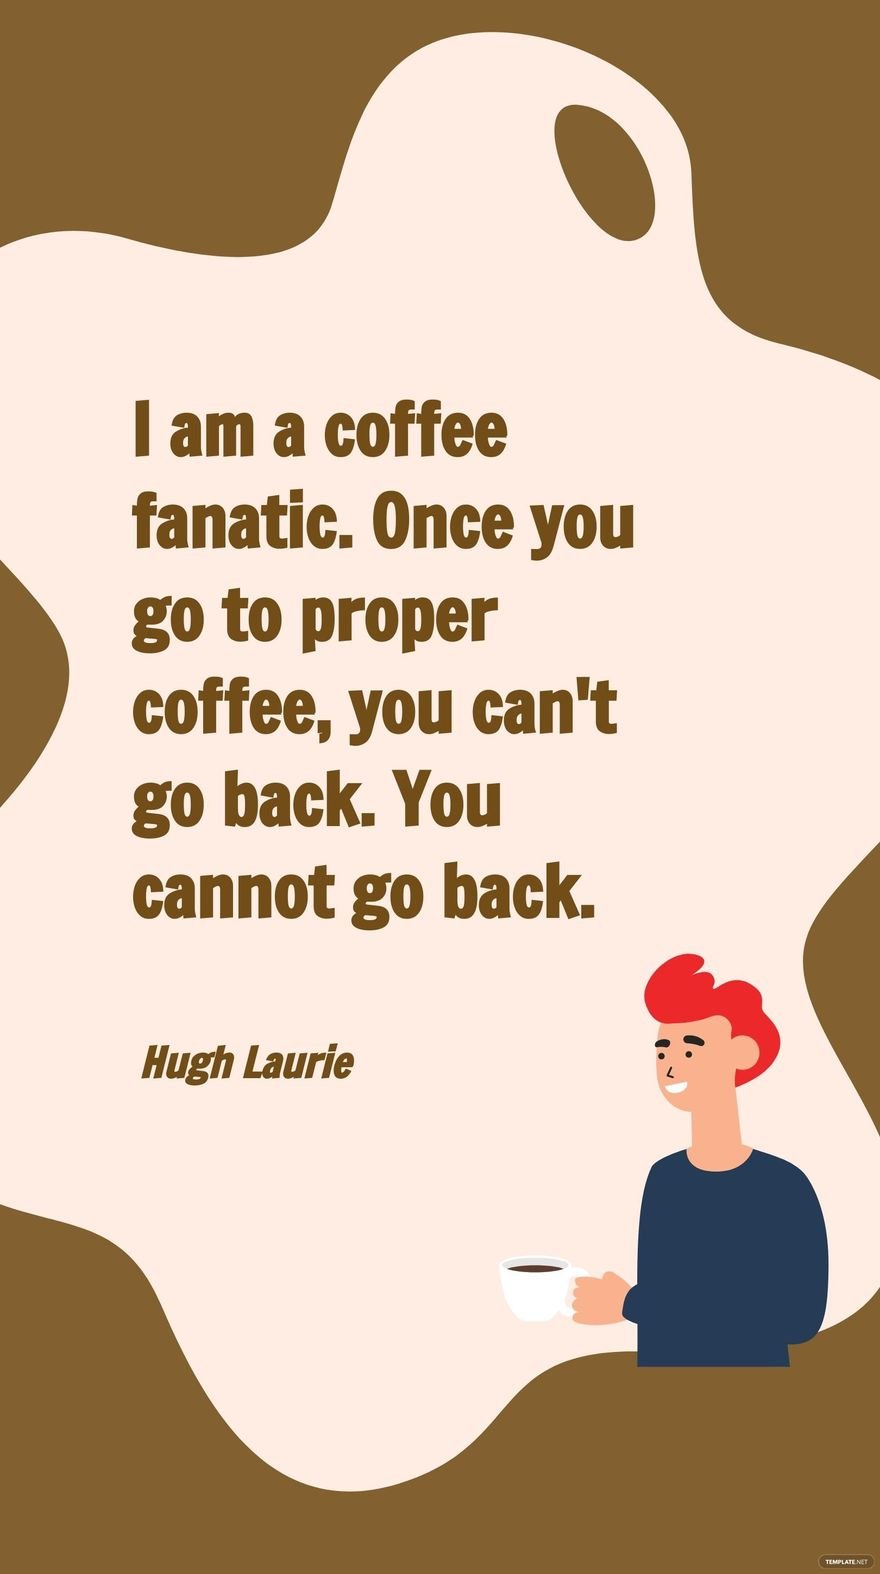 Free Hugh Laurie - I am a coffee fanatic. Once you go to proper coffee, you can't go back. You cannot go back. in JPG